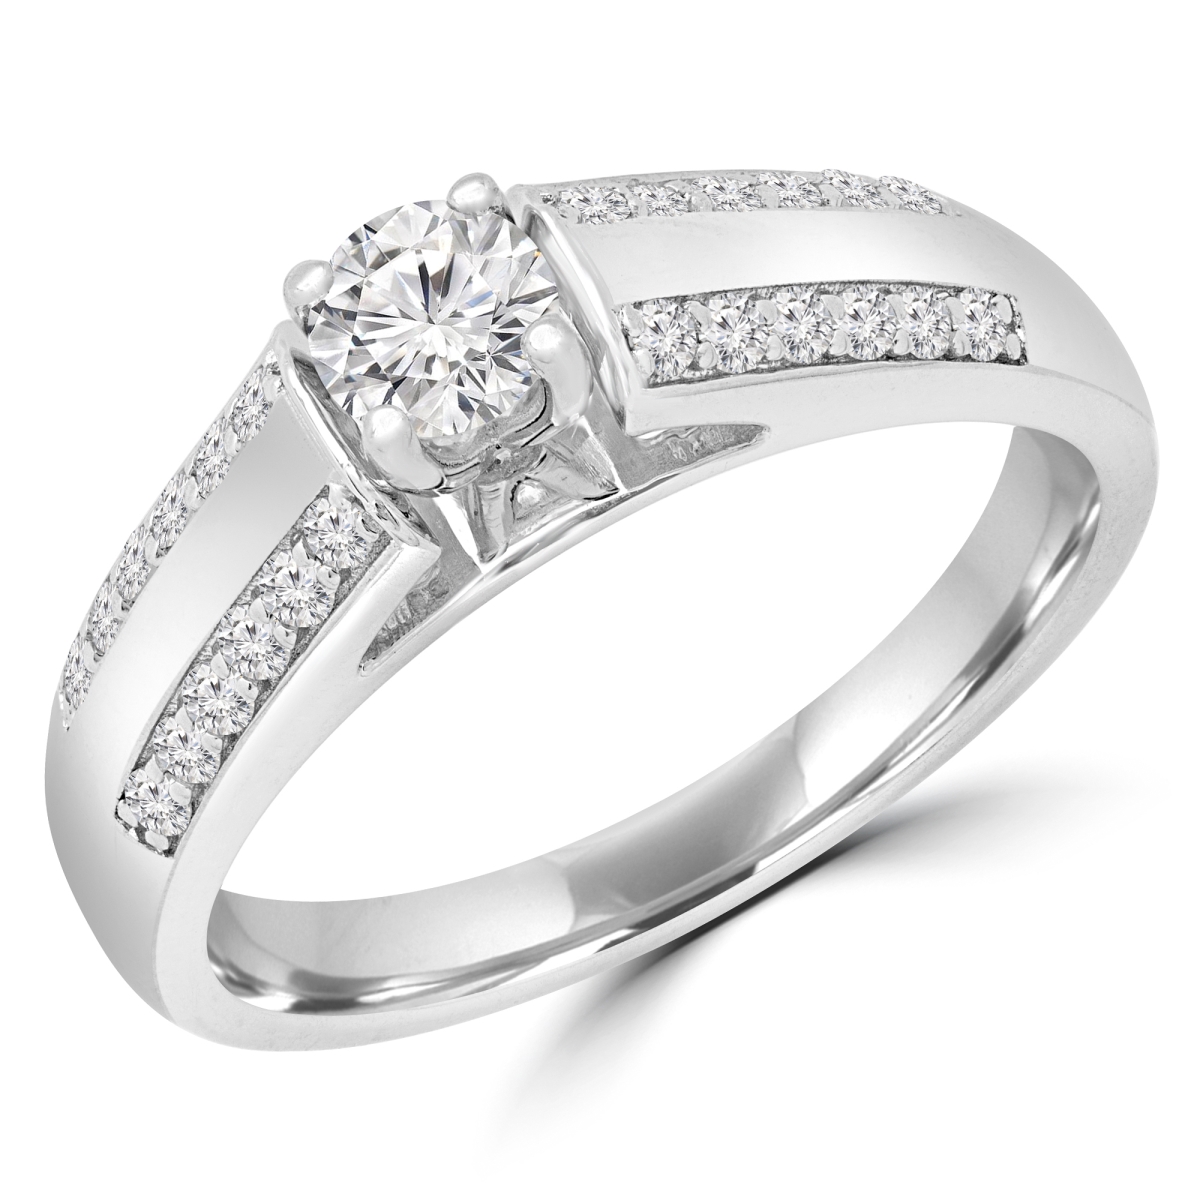 Picture of Majesty Diamonds MD190116-P 0.4 CTW Round Diamond Solitaire with Accents Engagement Ring in 14K White Gold